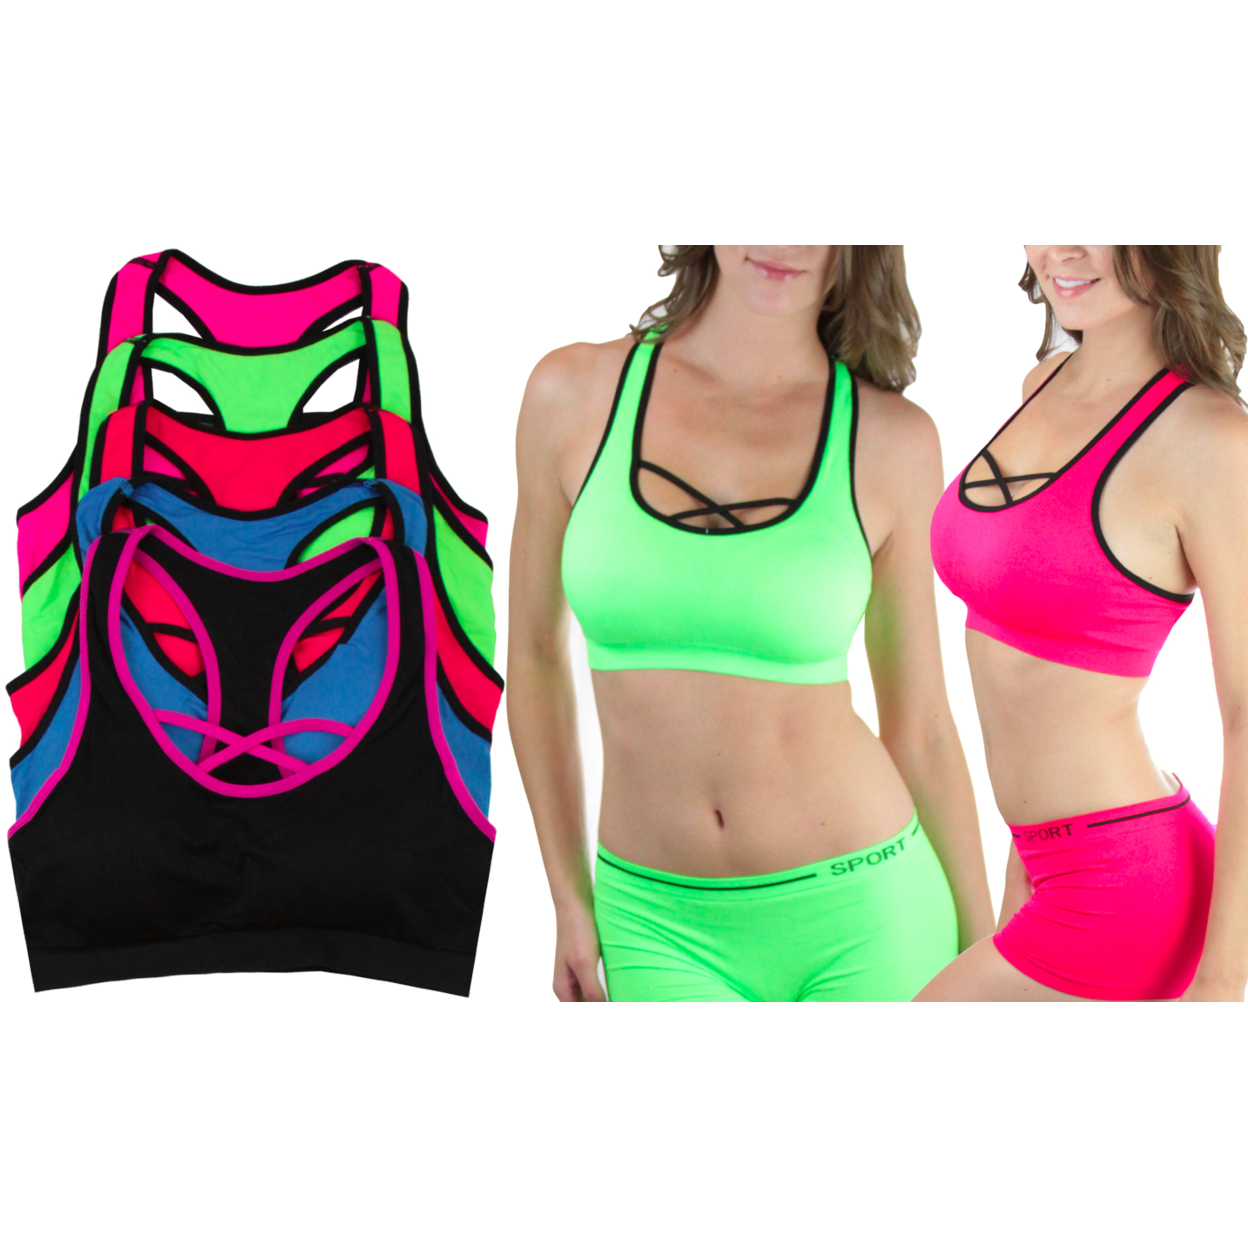 5-Pack Of Crisscross Padded Sports Bras Or 6-Pack Of Matching Boyshorts - Bras